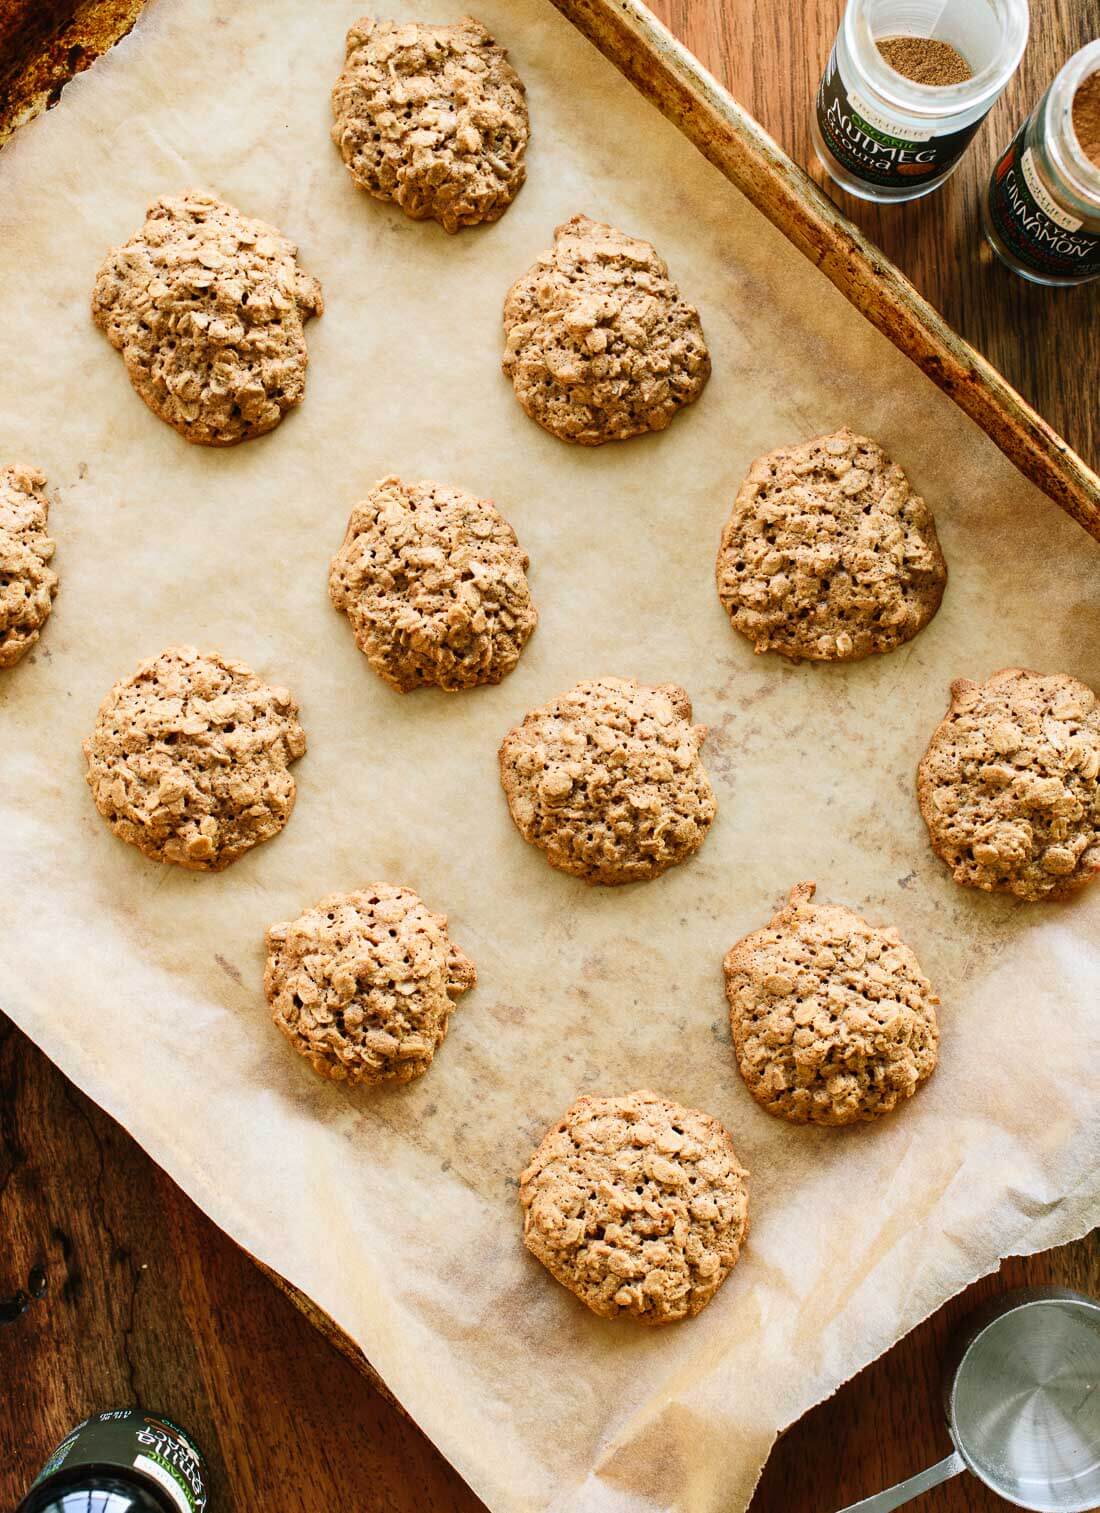 Absolutely delicious oatmeal cookies for the holidays!